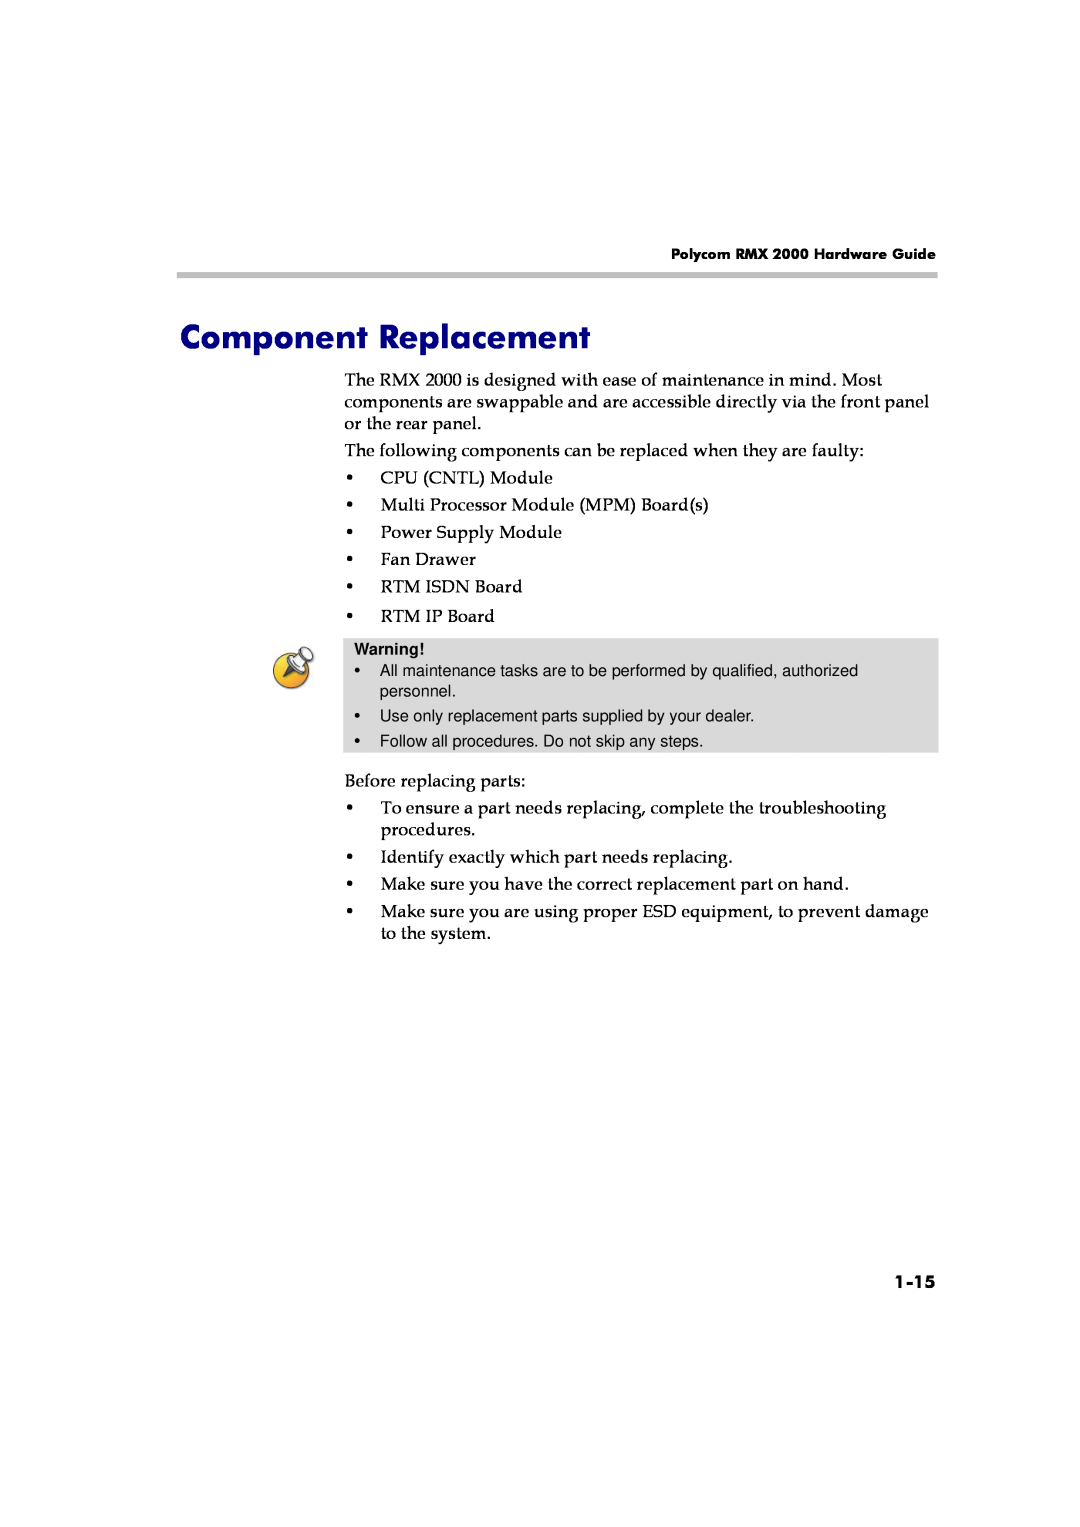 Polycom RMX 2000 manual Component Replacement, 1-15 